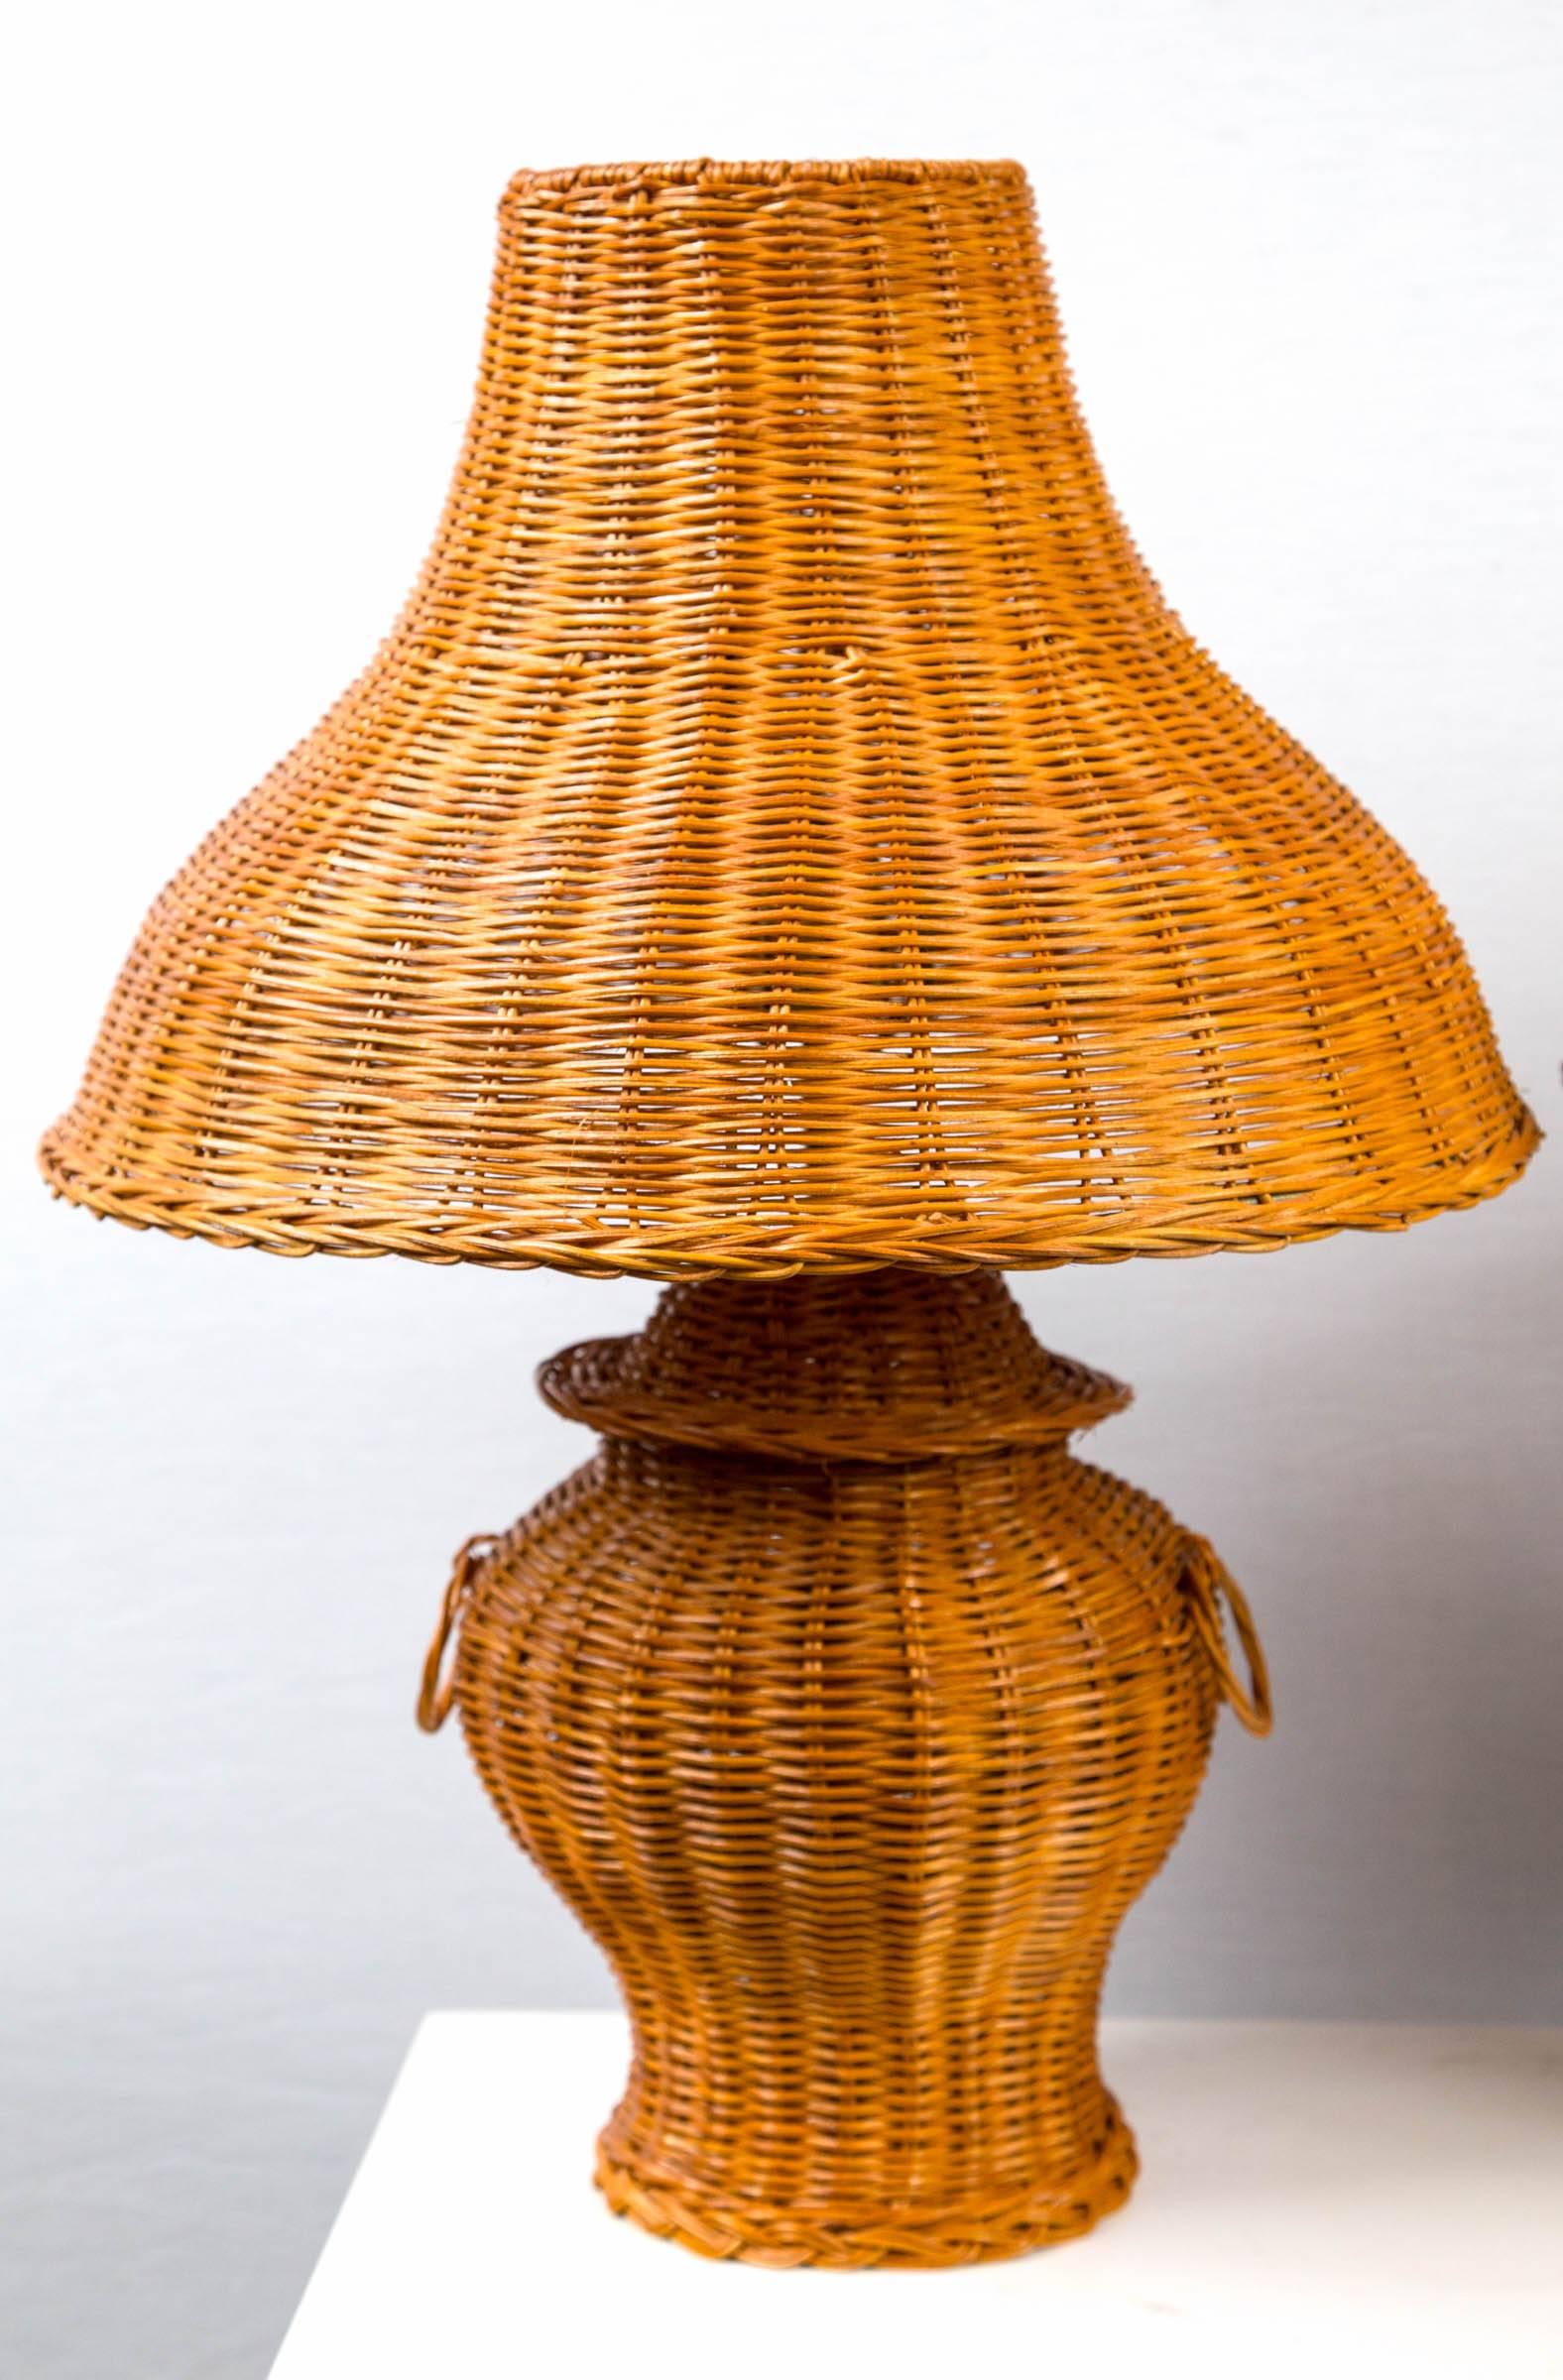 Ginger jar shaped wicker lamp pair with wicker lamp shades. Lamp base is 5.5 inches in diameter. One standard bulb per lamp.
 